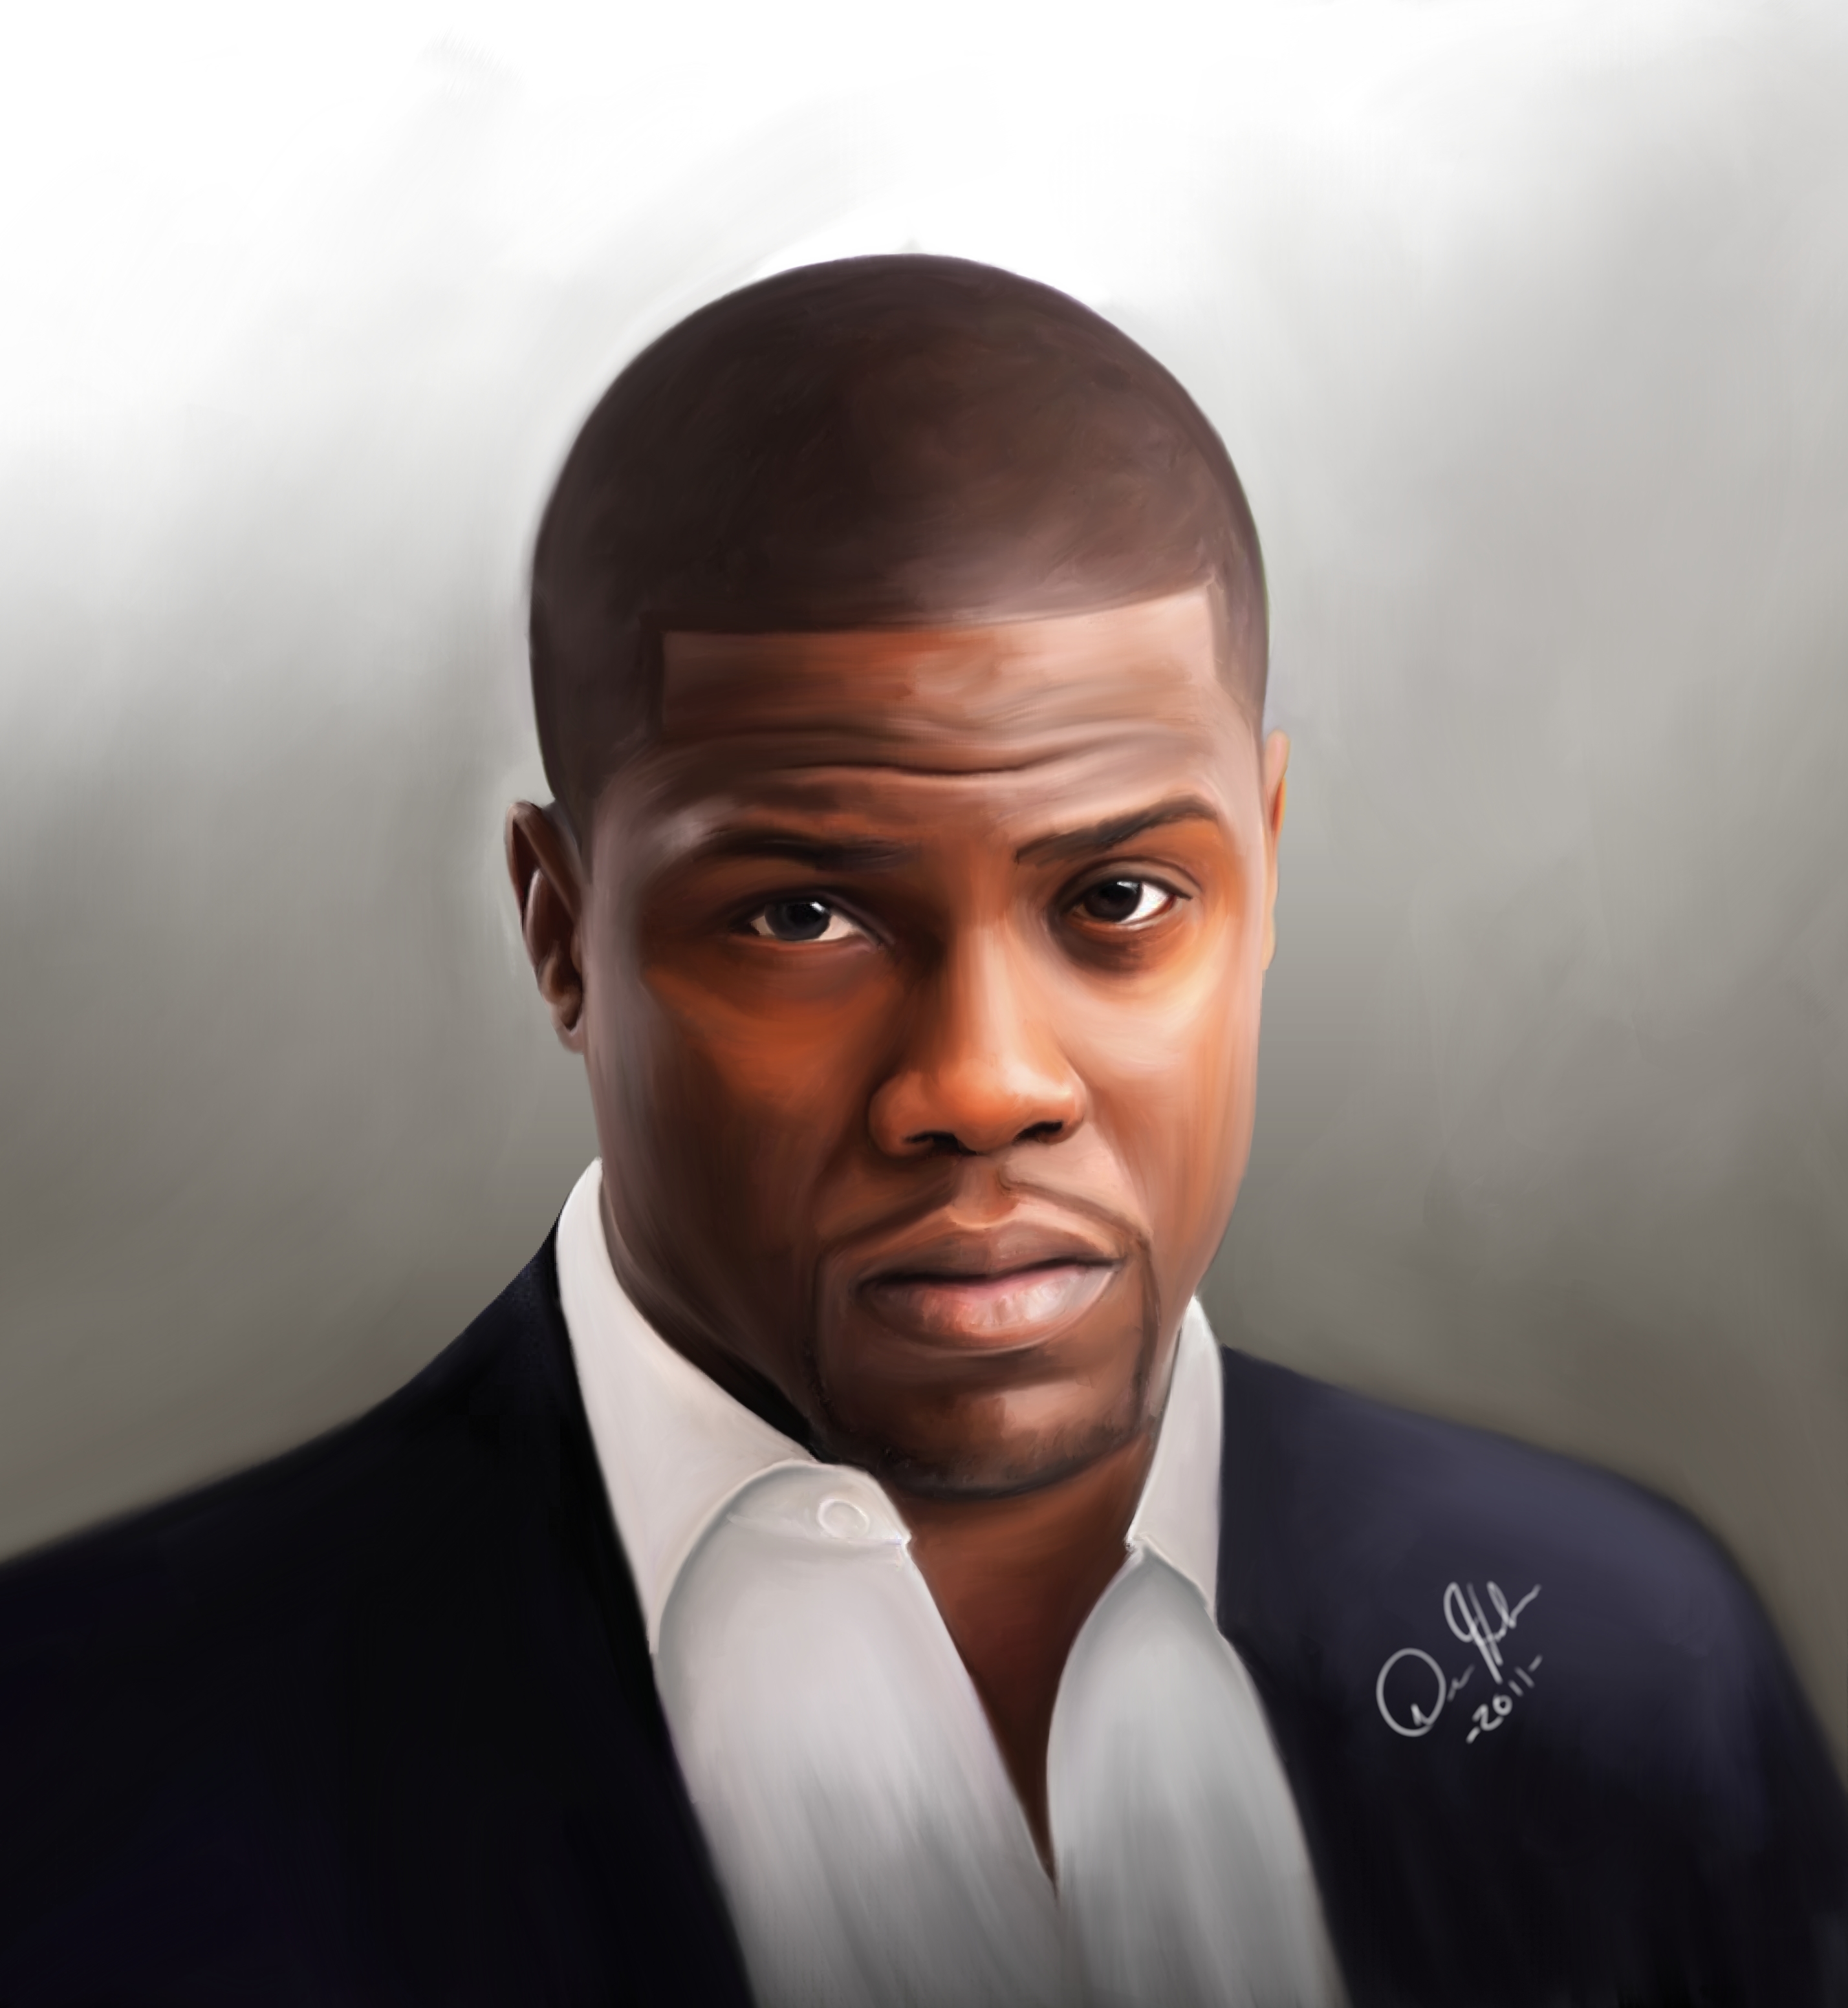 HD Wallpaper Source Kevinhart You Can Photo